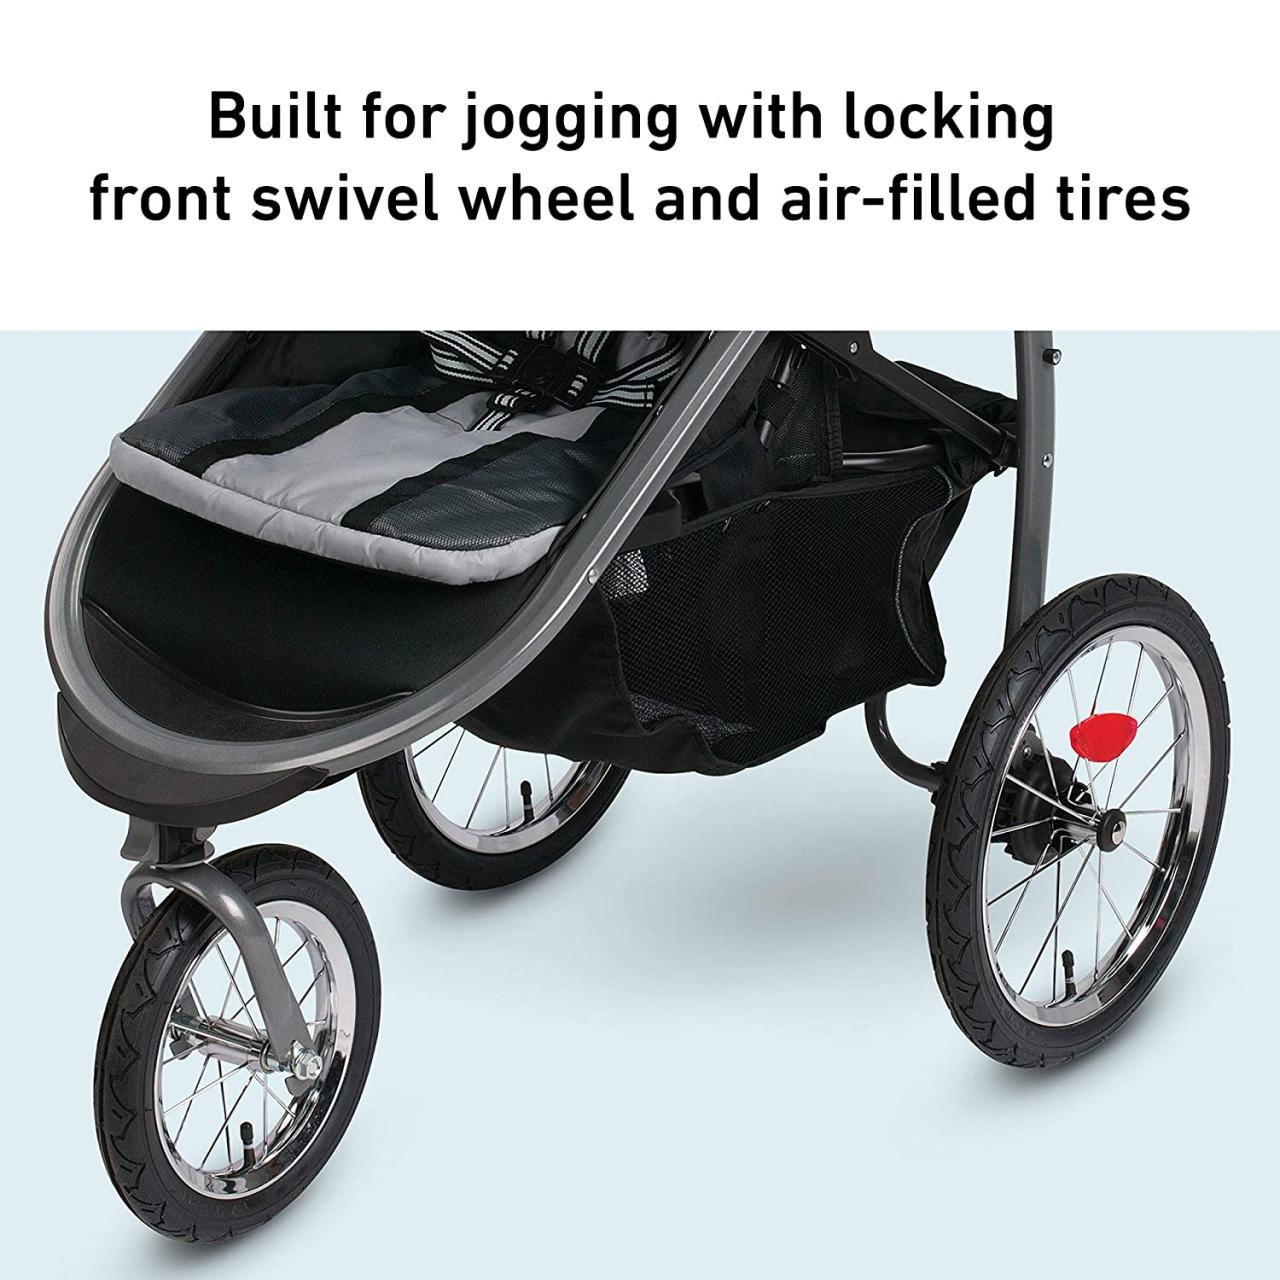 Graco® FastAction® Jogger Click Connect™ Travel System | Travel system  stroller, Graco stroller, Baby car seats